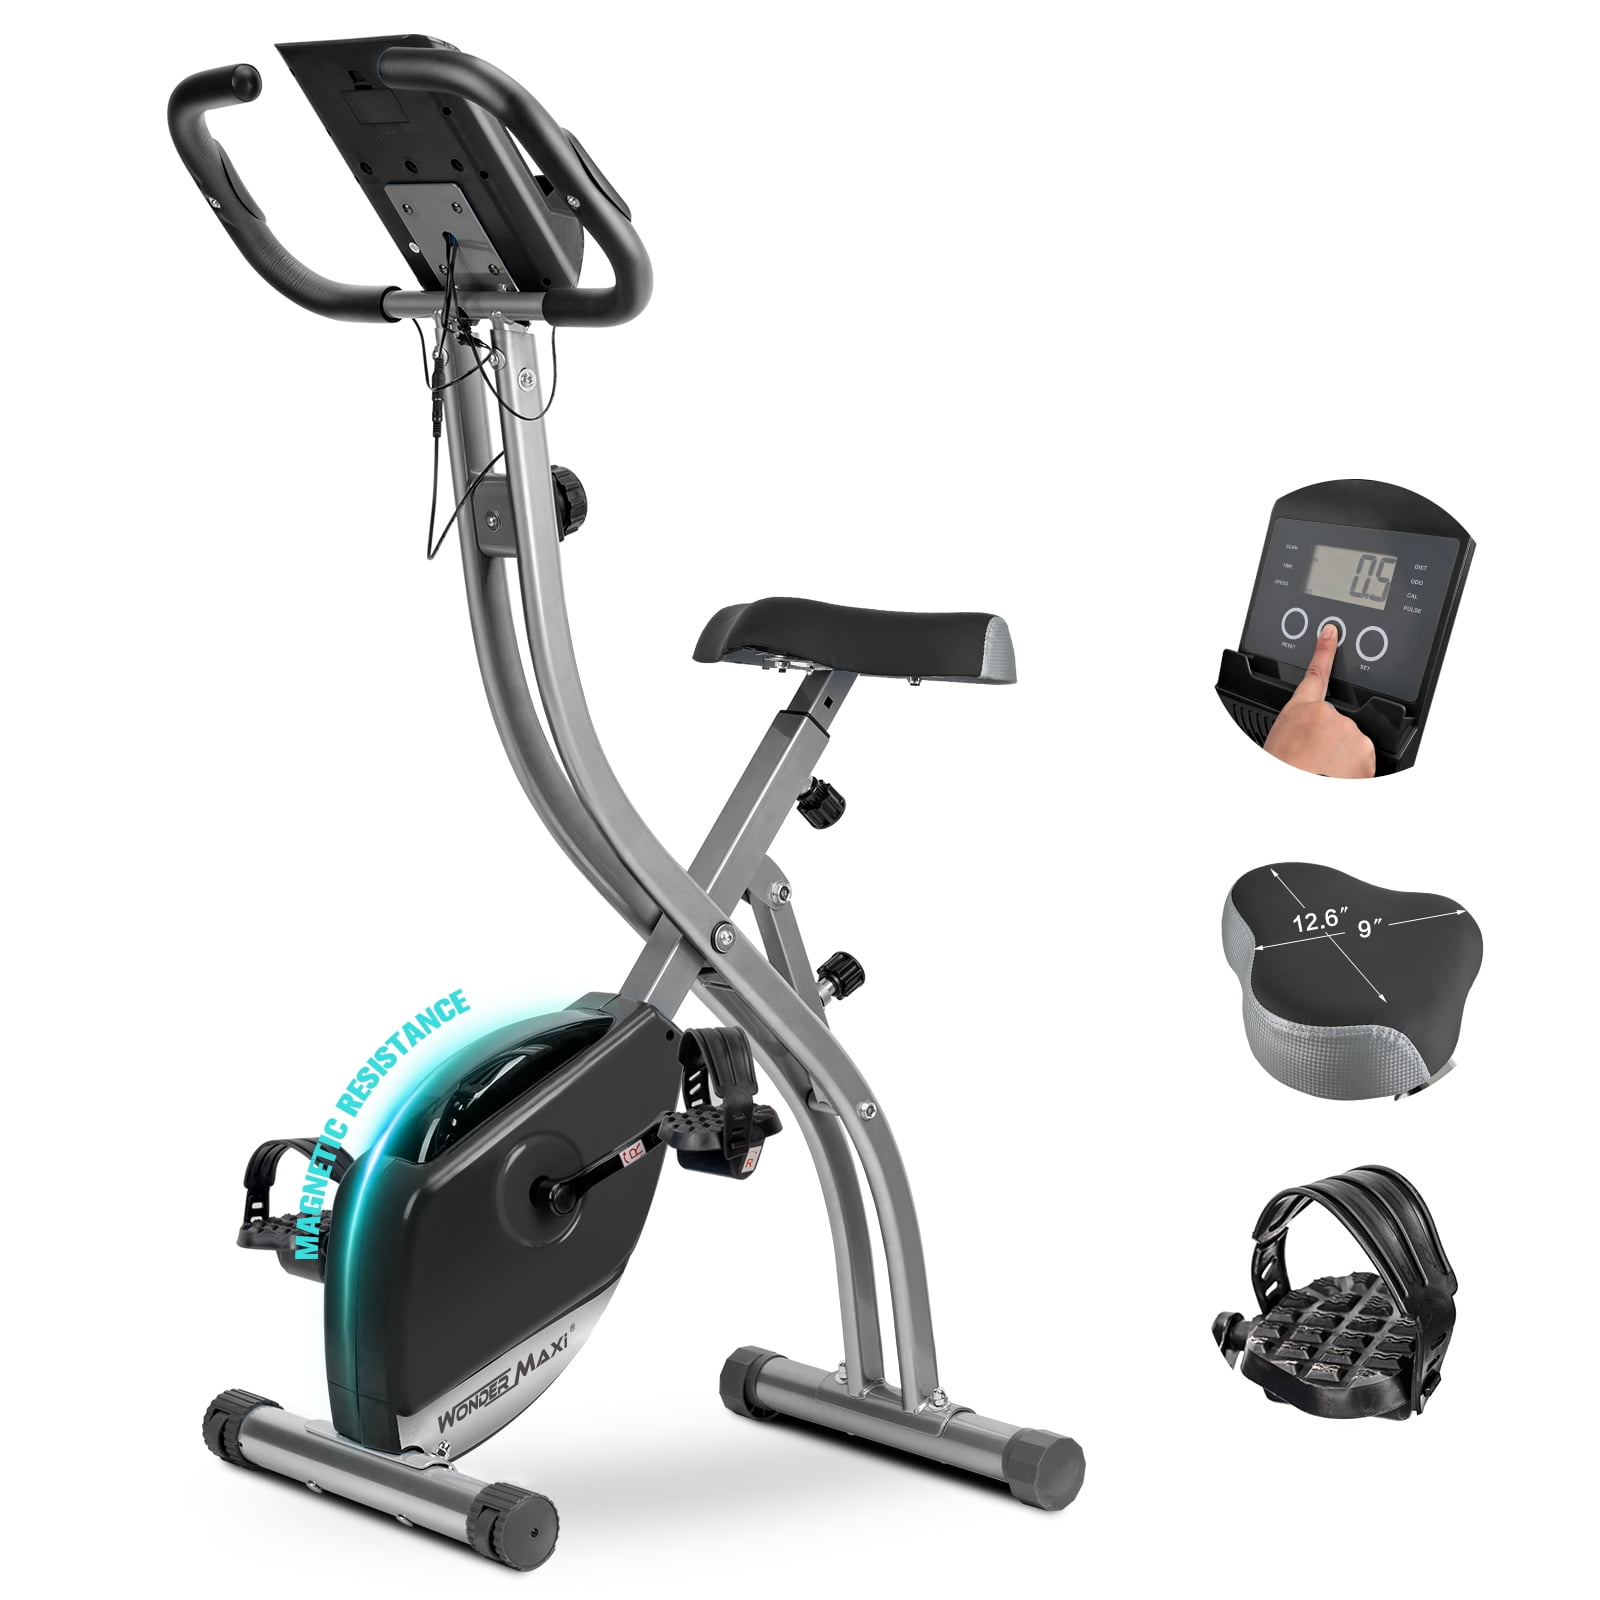 Details about   Home Gym Bicycle Cycling Fitness Exercise Stationary Bike Cardio Workout Bikes 